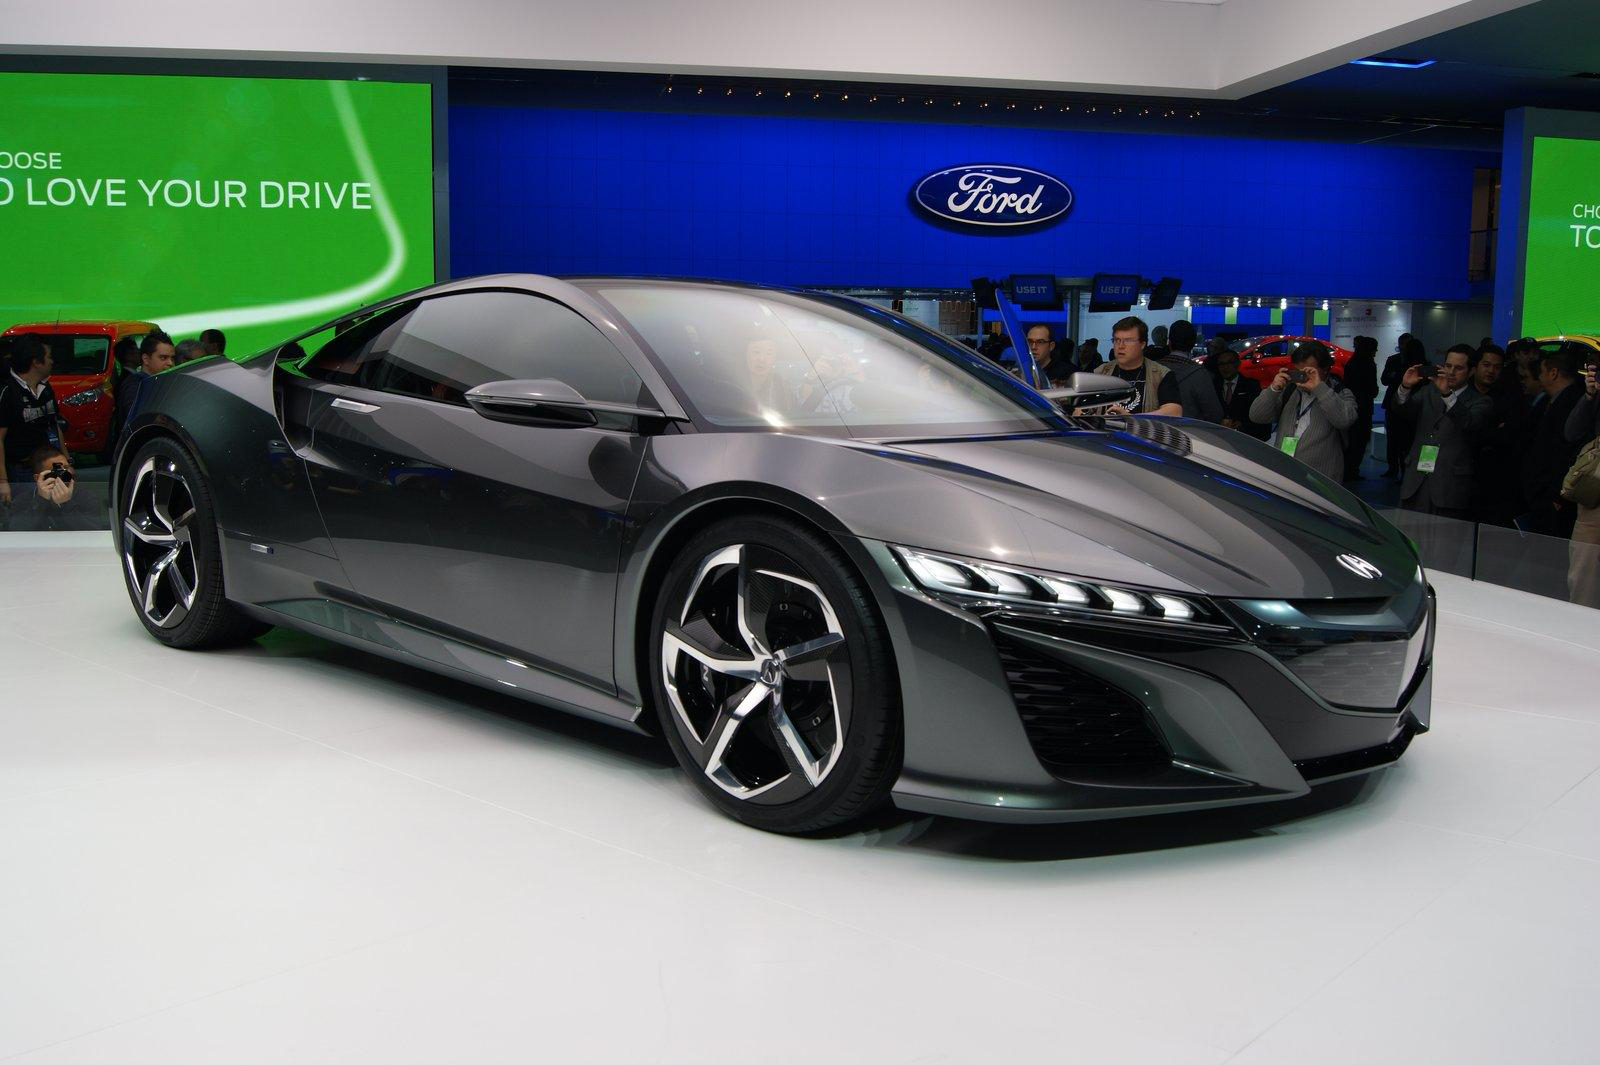 HD Wallpaper Acura Nsx Concept Car Model By